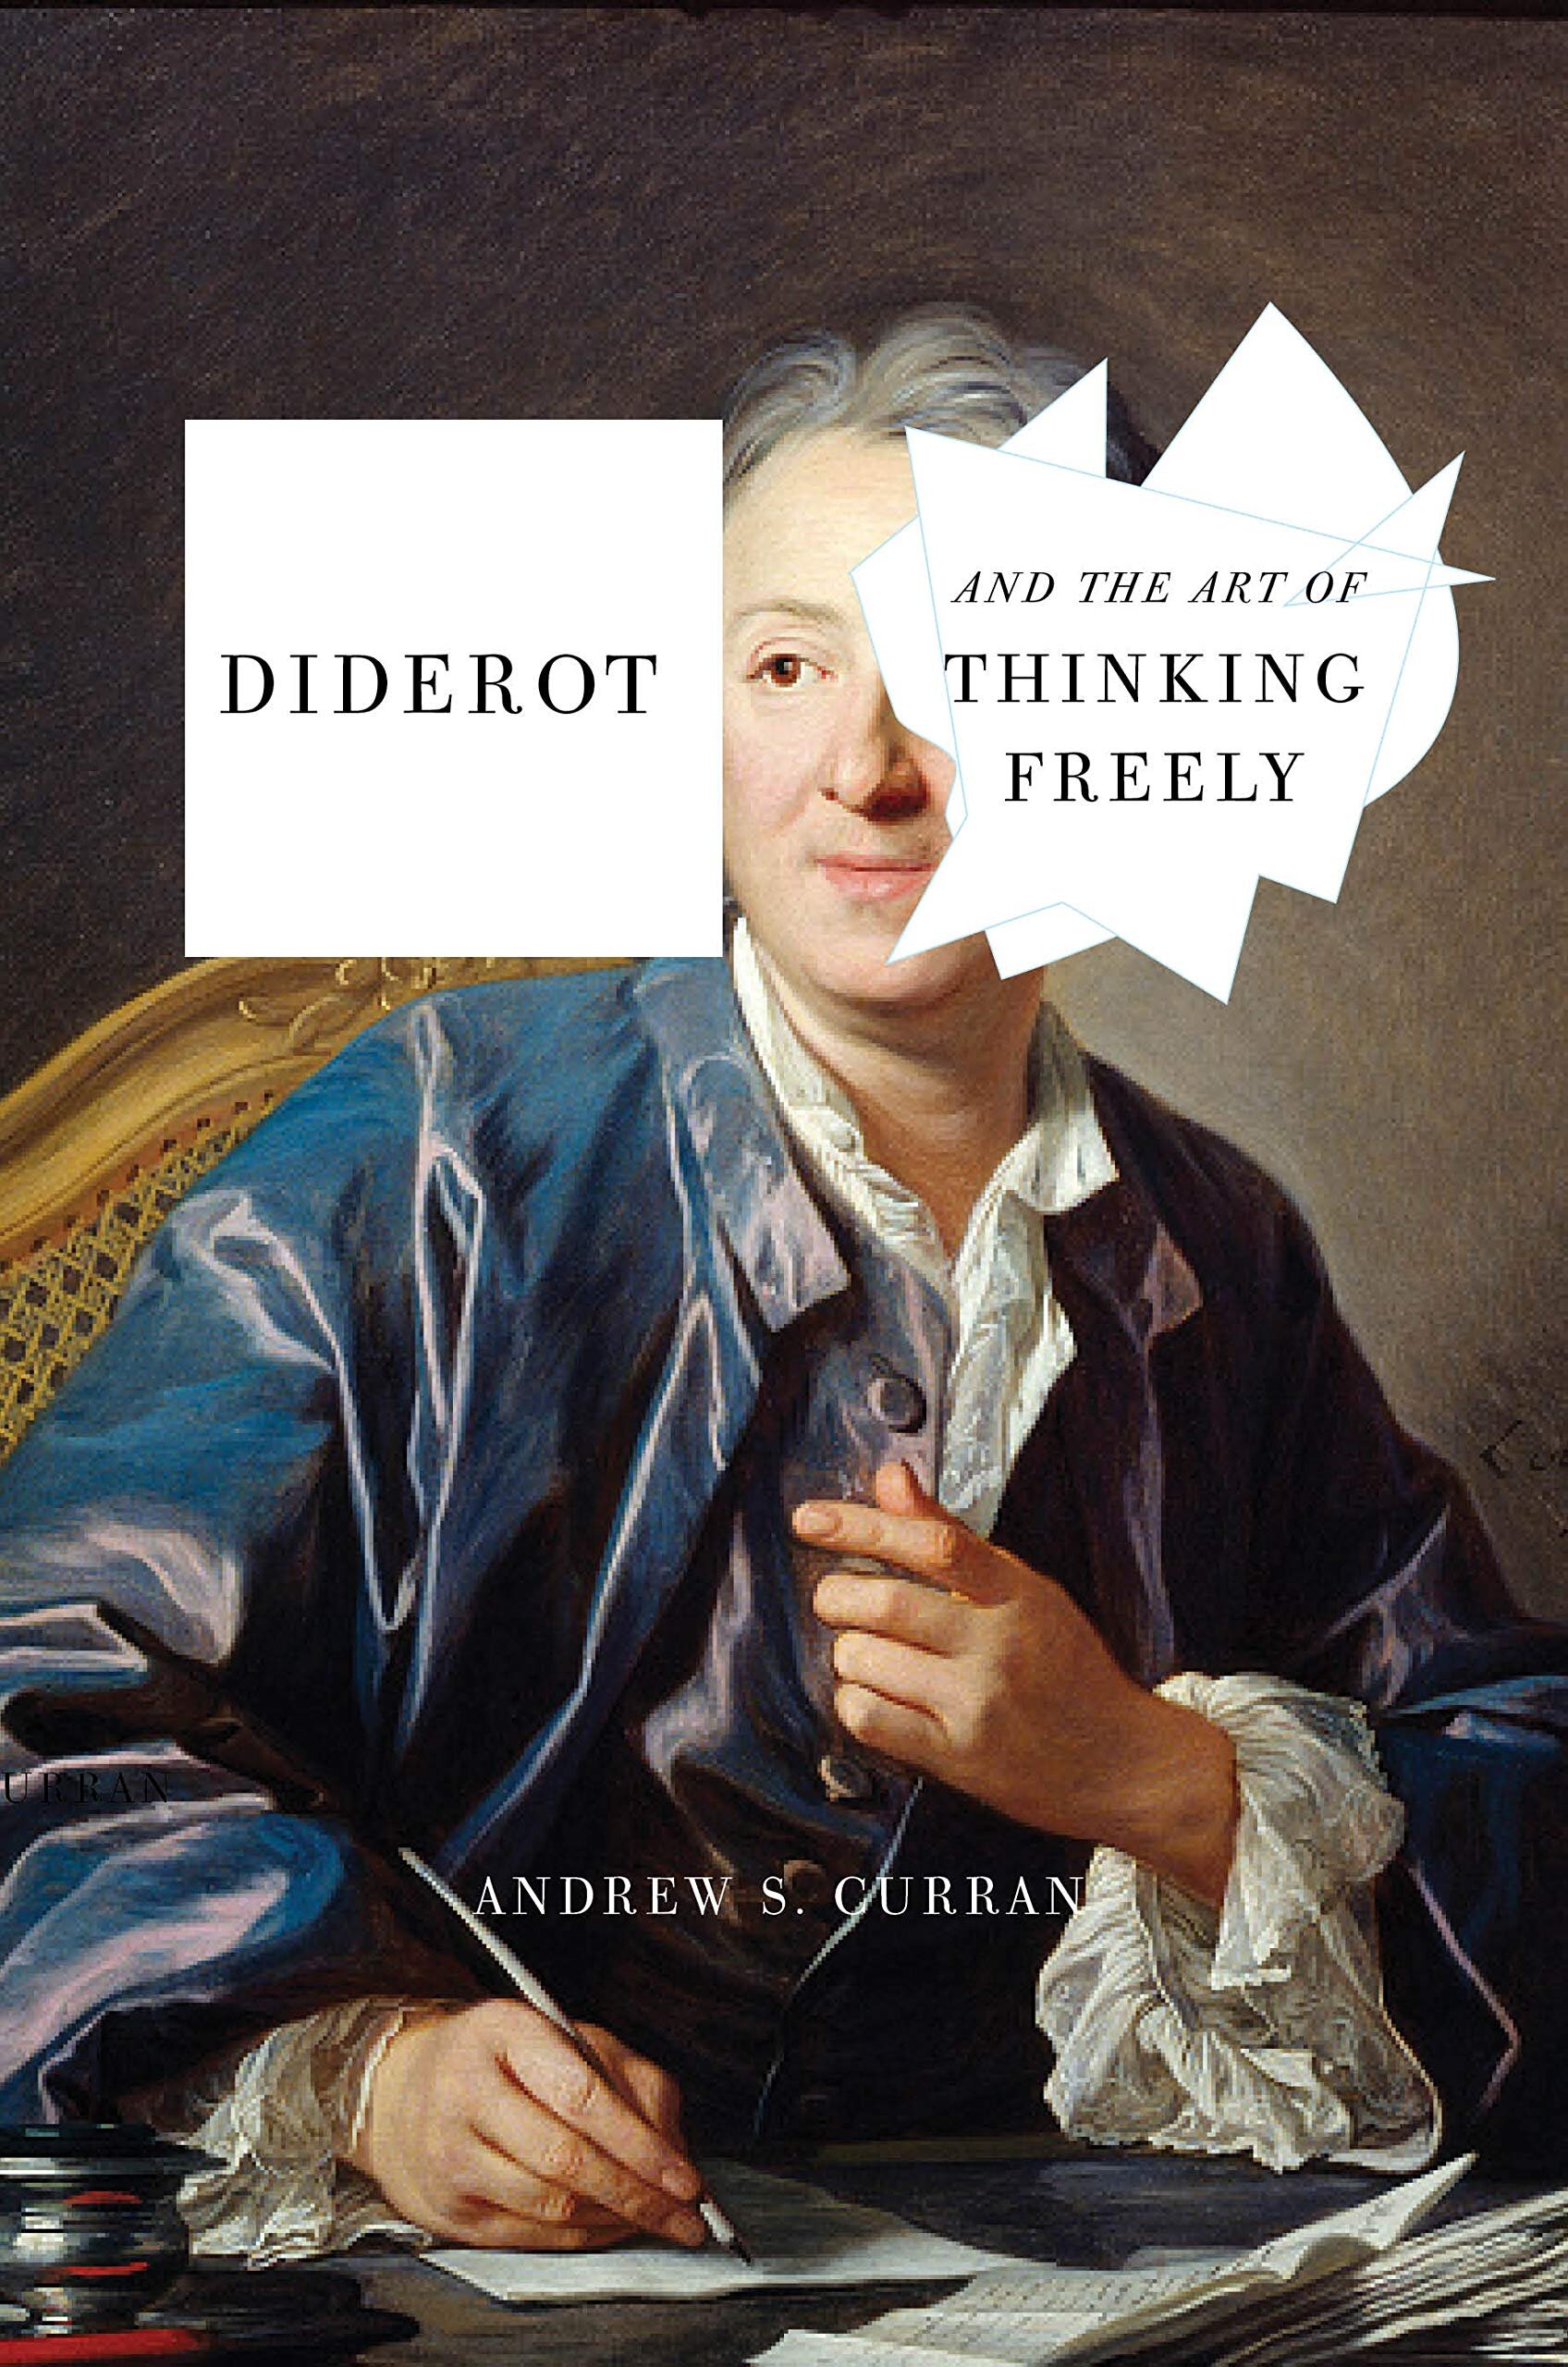 Biography Diderot and the Art of Thinking Freely by Andrew S Curran.jpg